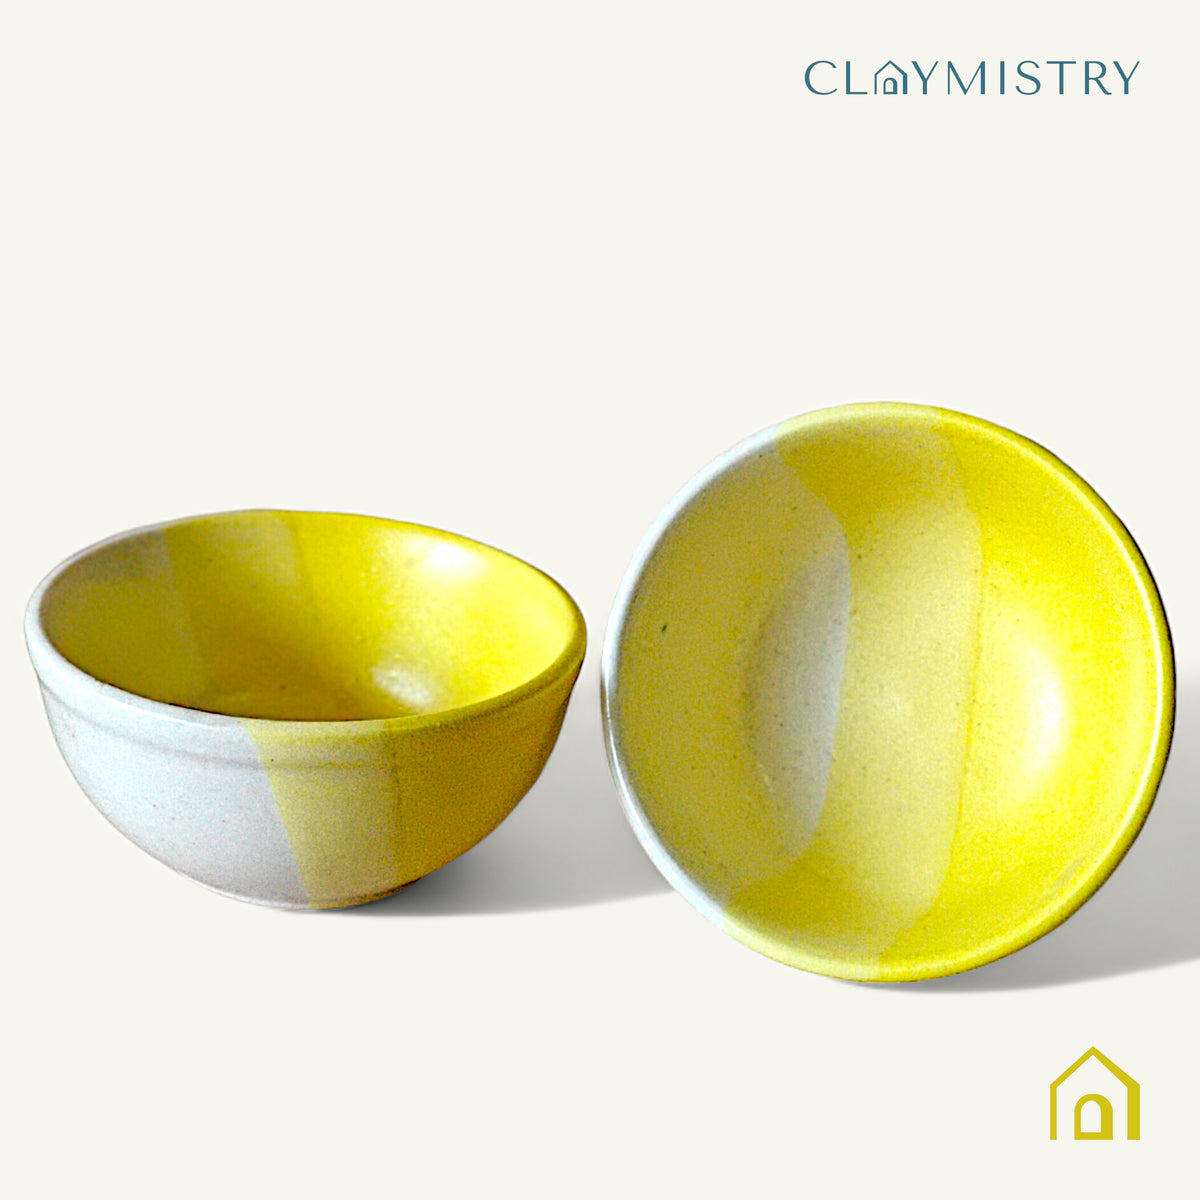 Triple Yellow Trouble: Bowl-ing Over Boredom with a Splash of Sunshine!